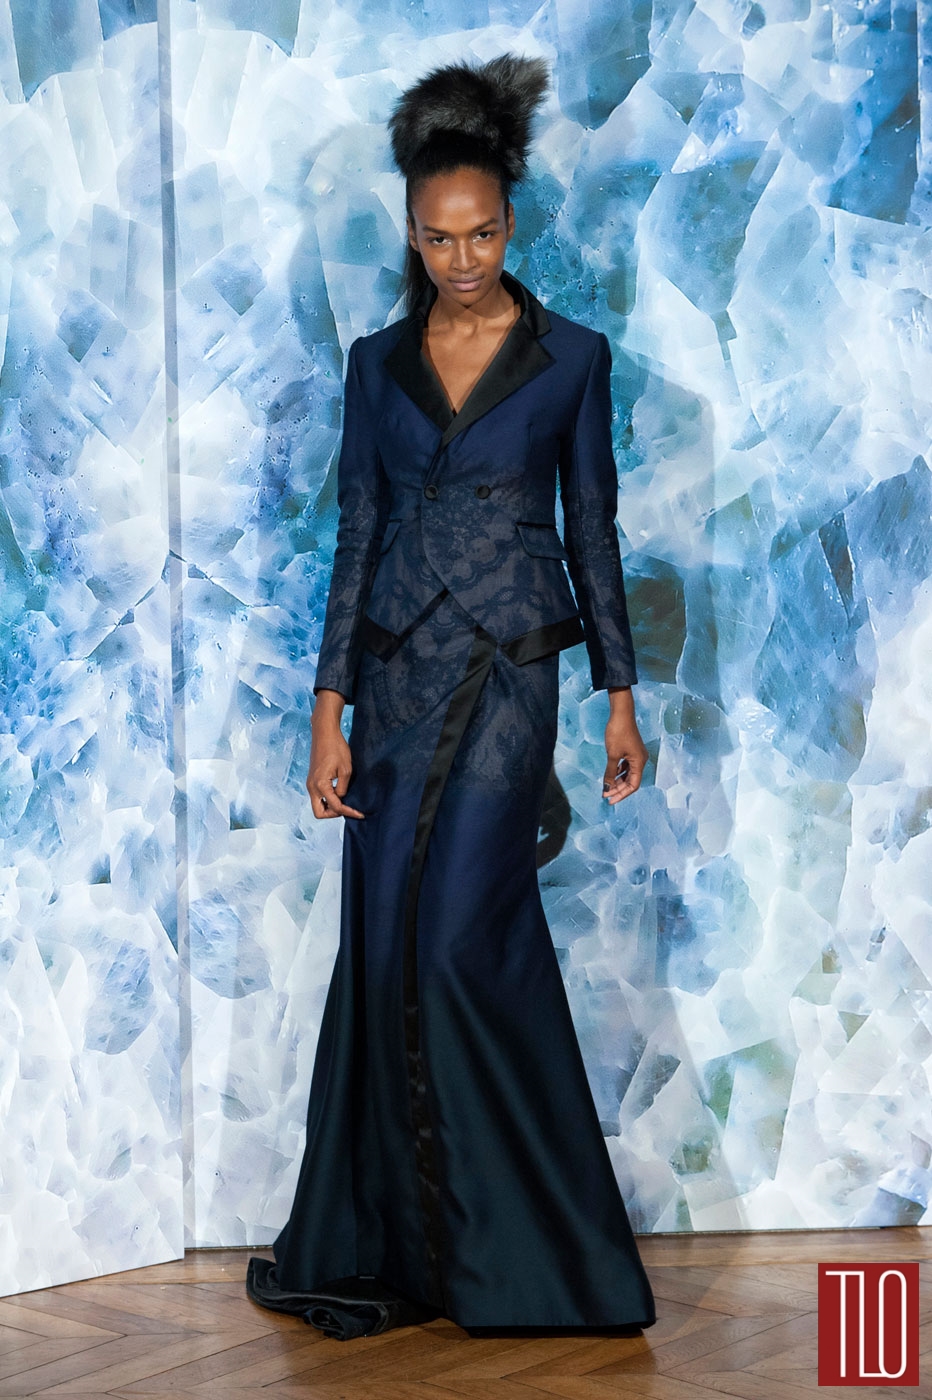 Alexis-Mabille-Fall-2014-Couture-Collection-Tom-Lorenzo-Site-TLO (1)